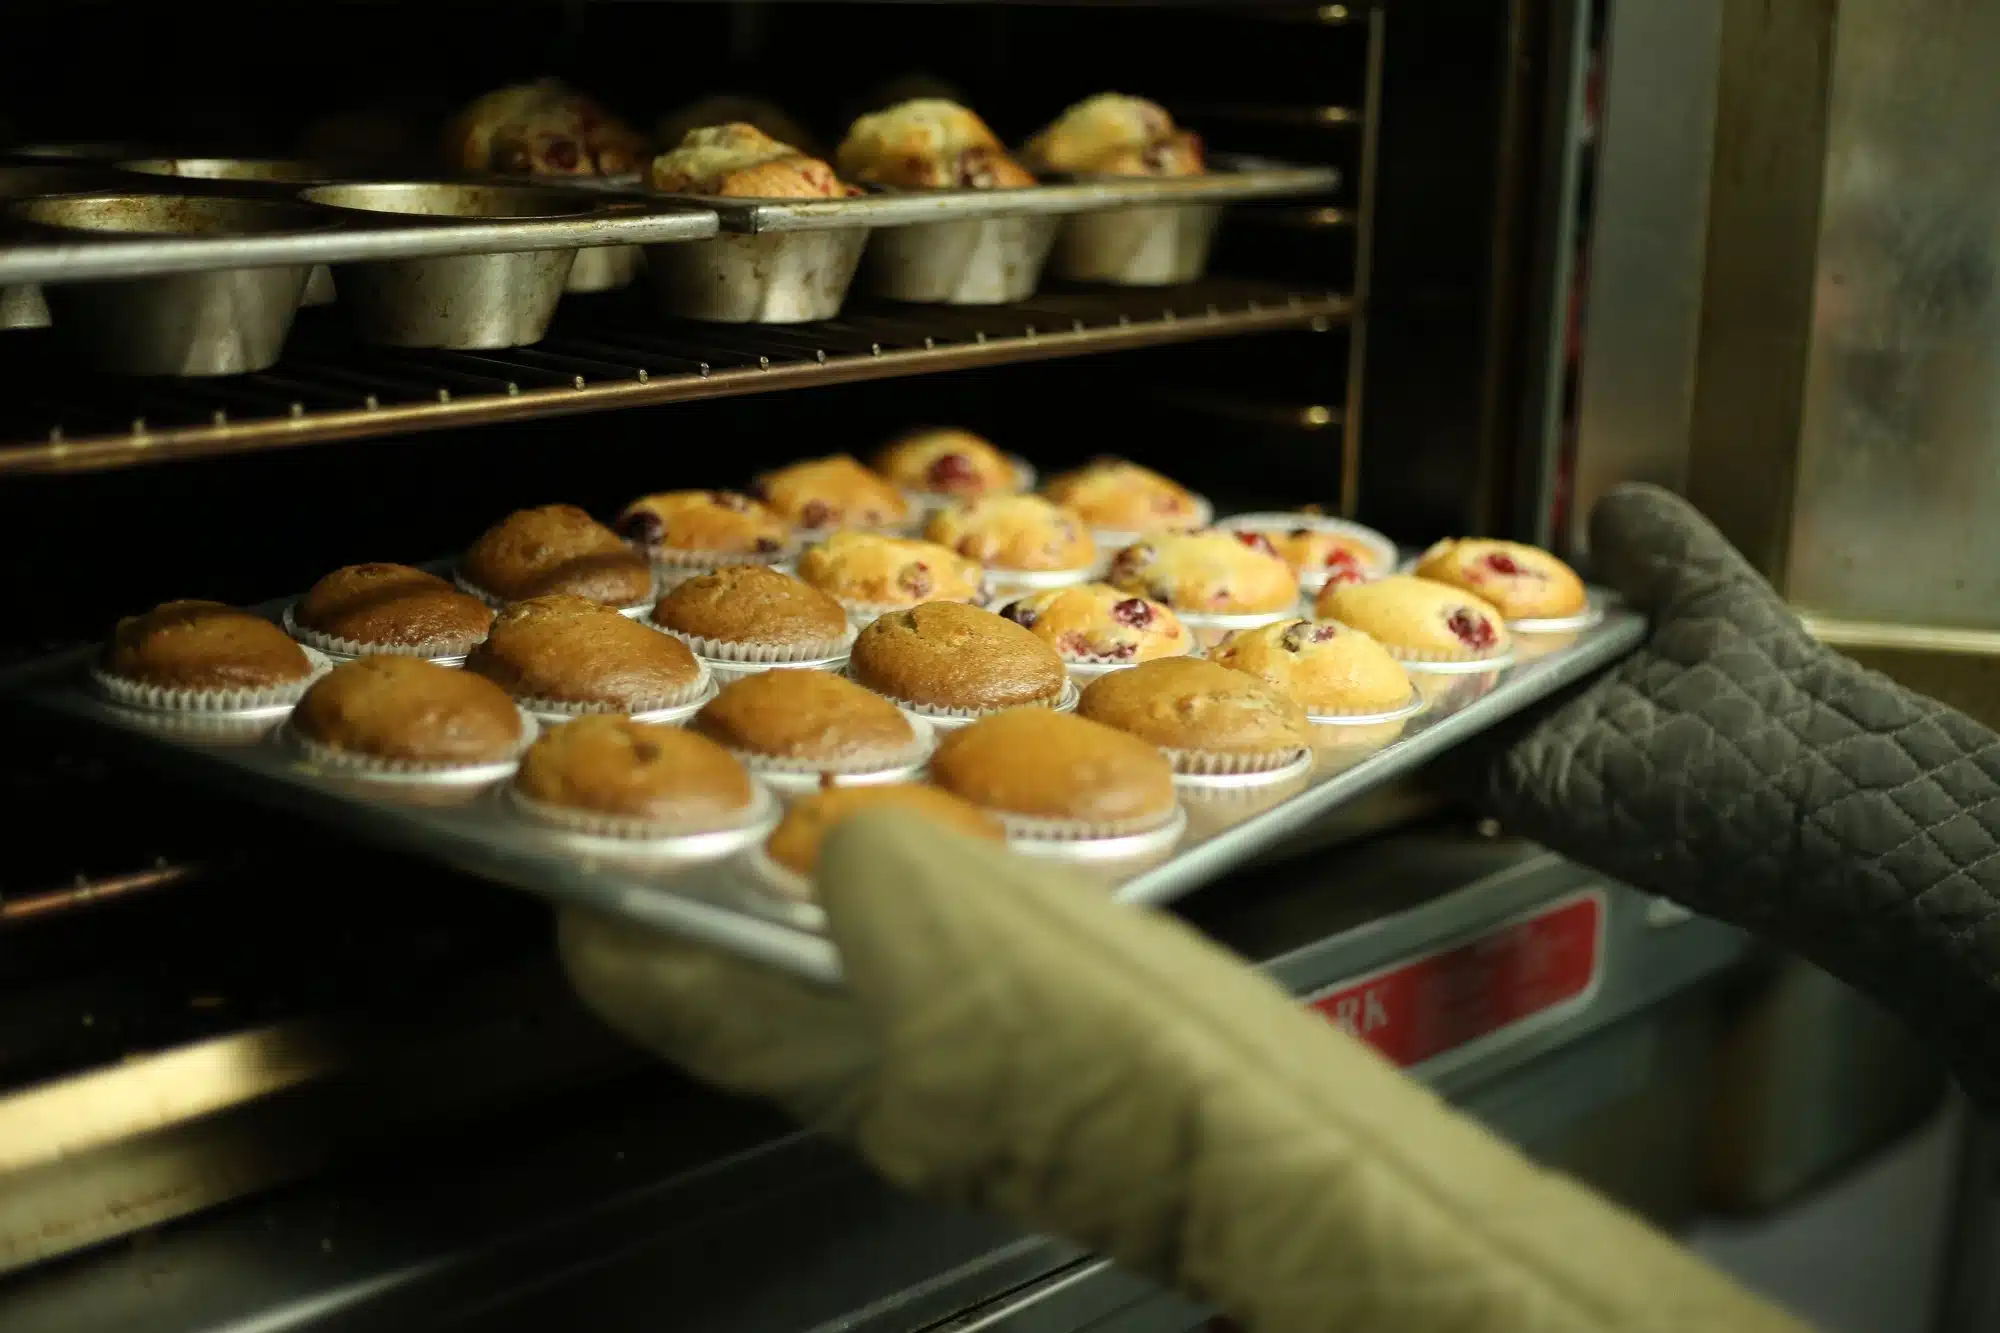 Muffins coming out of the oven, representing the concept of small business CGT concessions.